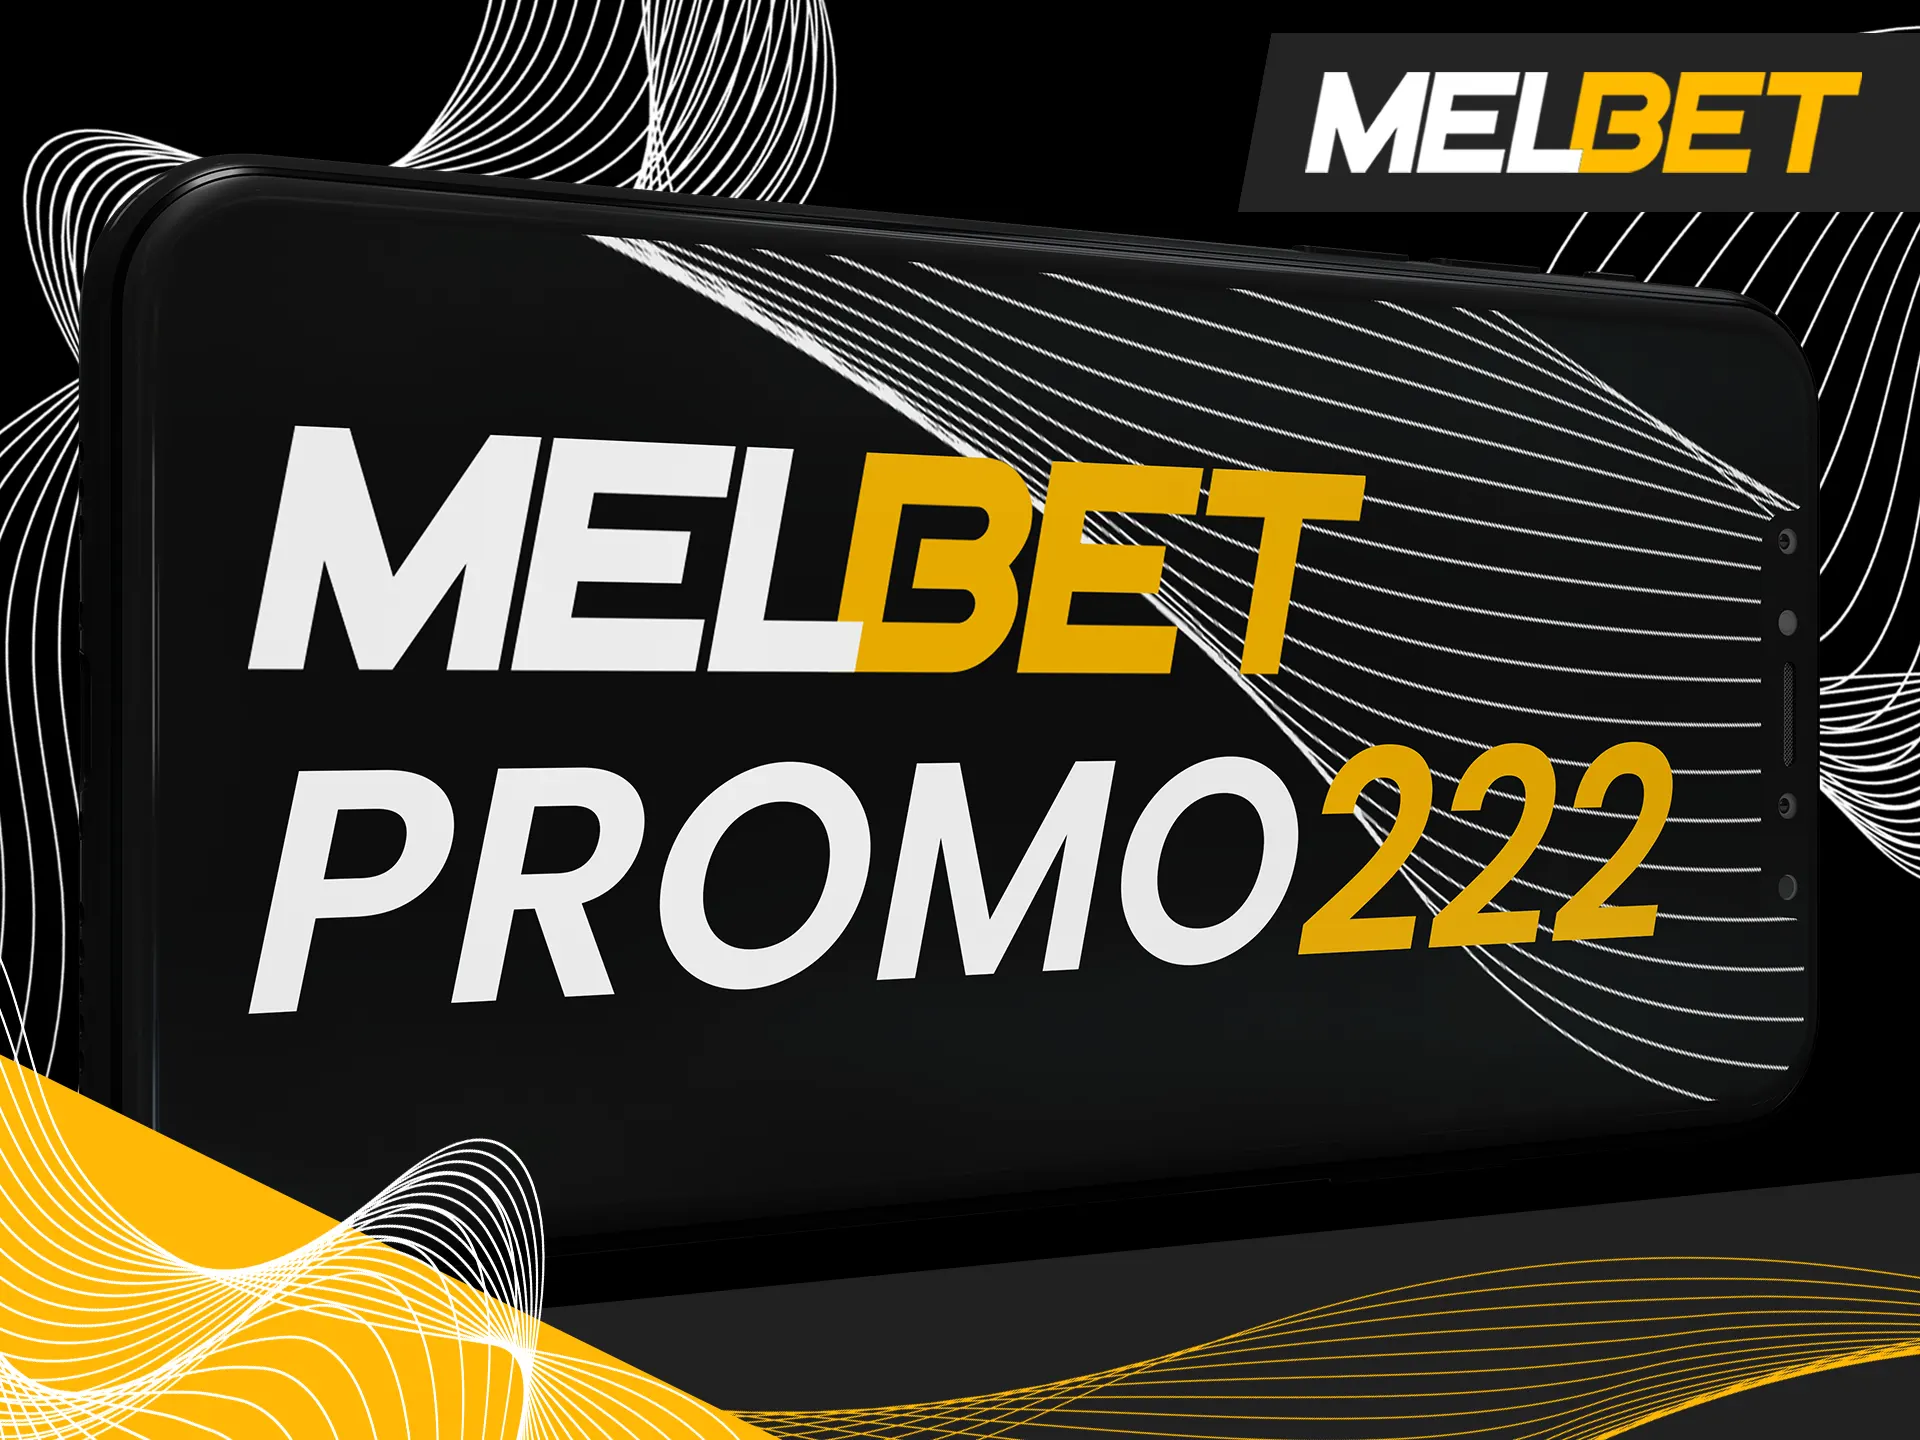 Use Melbet promocode when register new account.